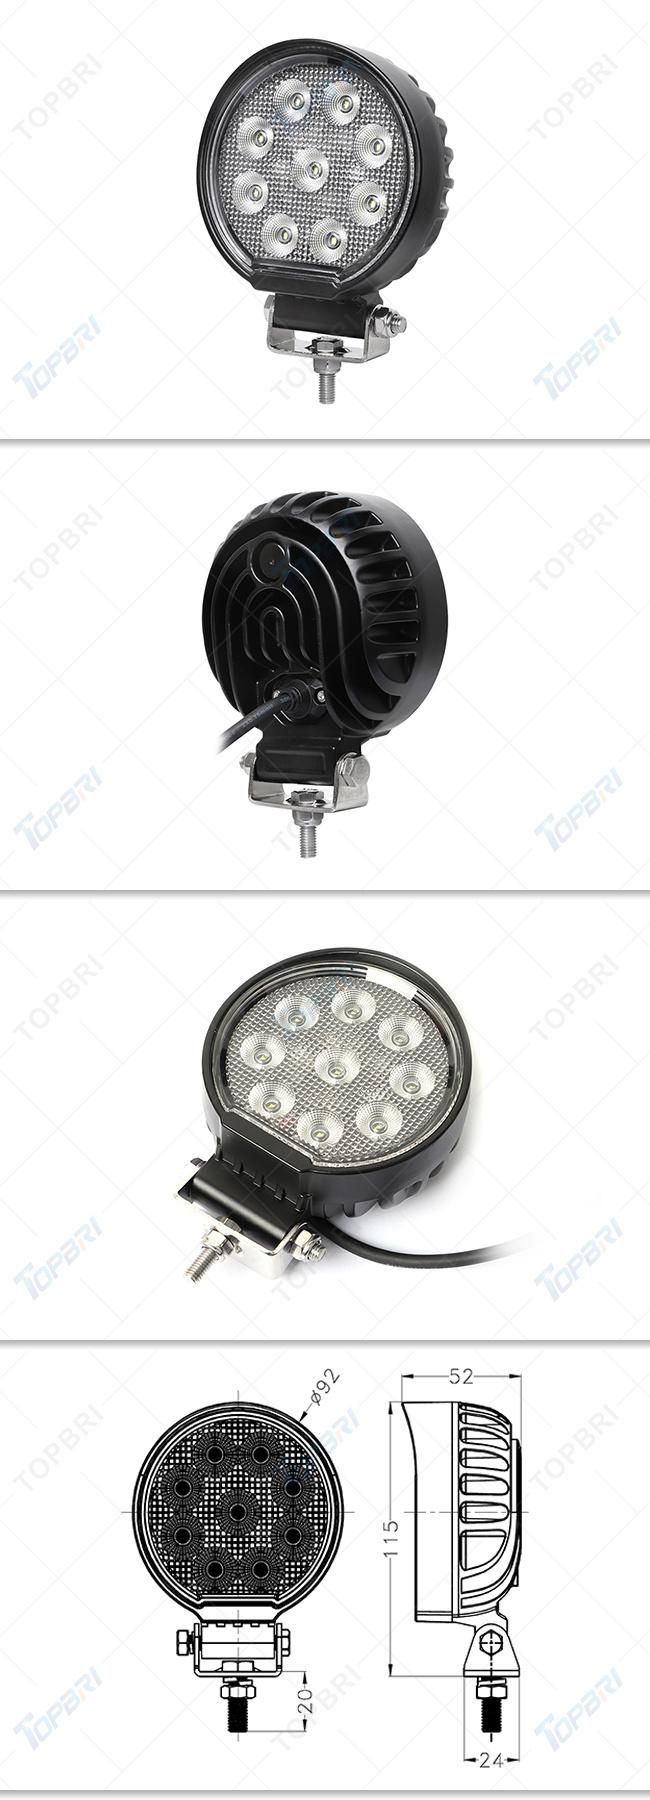 RoHS CE 27W Round Offroad Driving Motorcycle Work Light for Truck Tractor Trailer Car